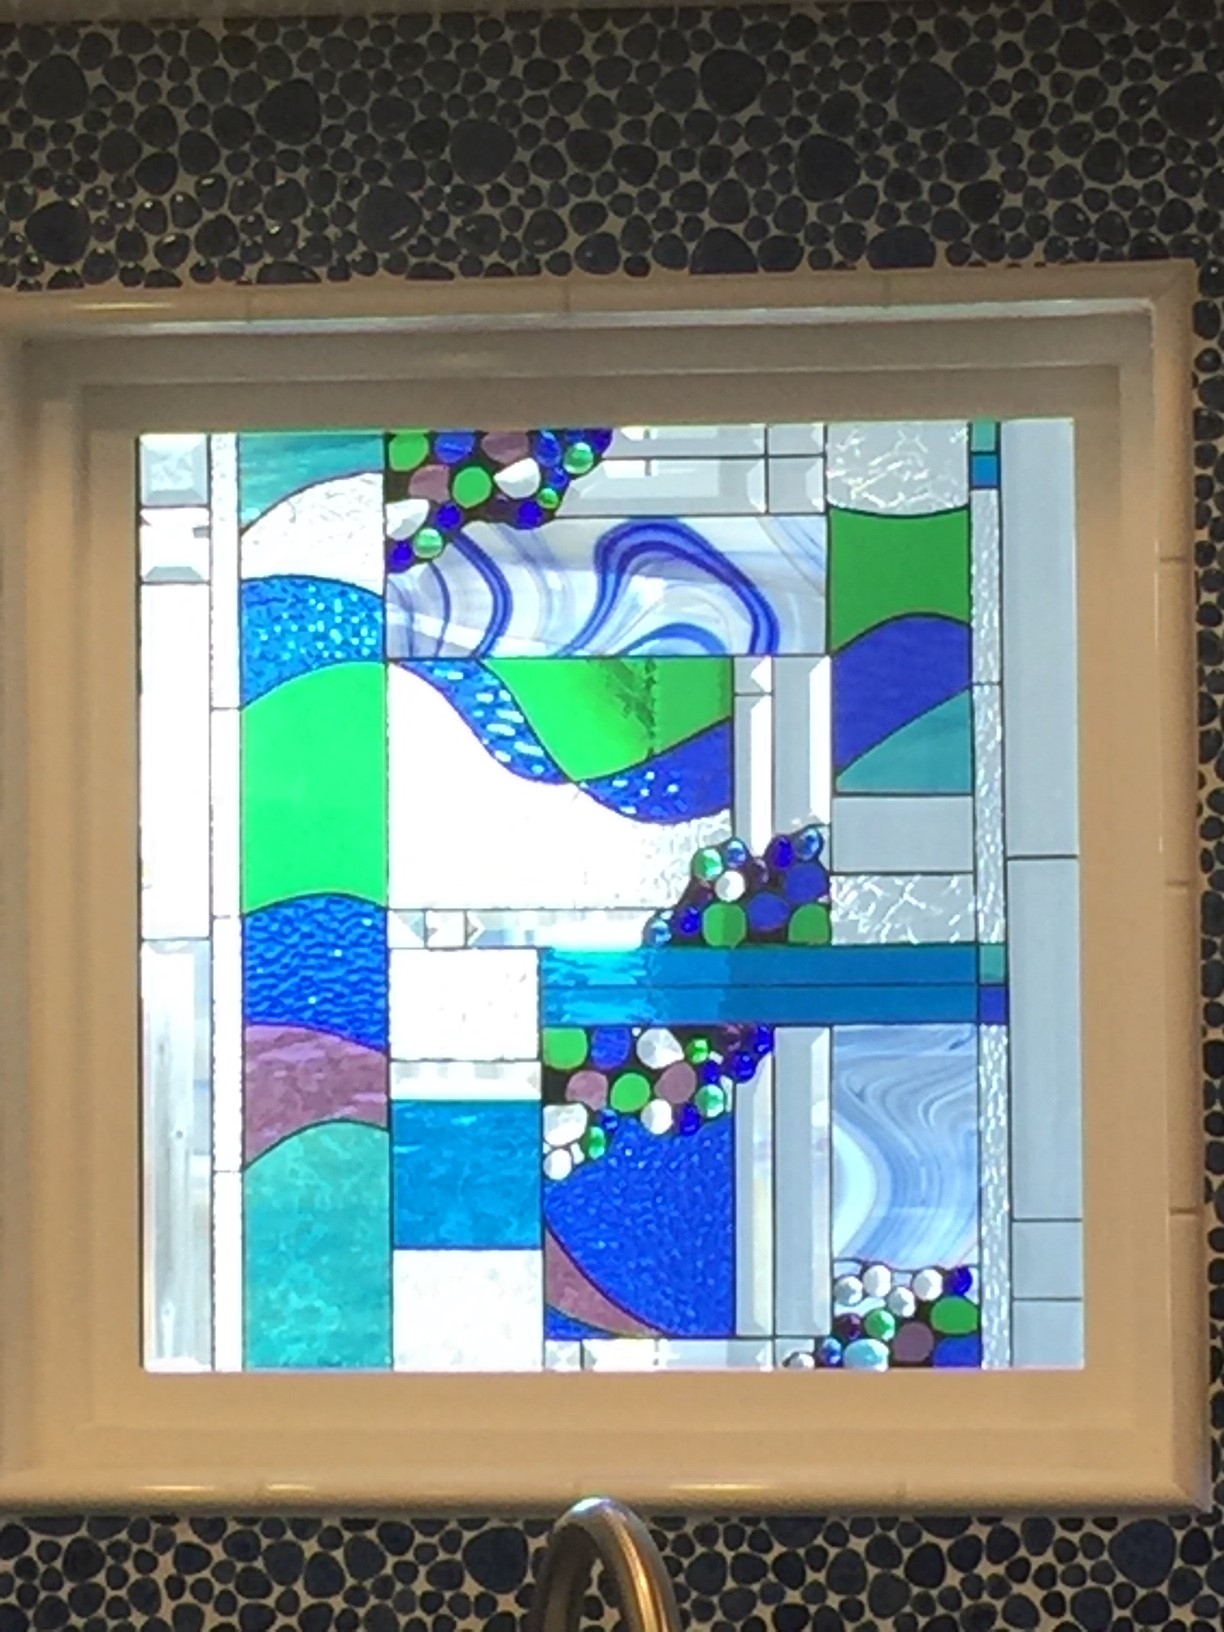 Contemporary Abstract Vinyl Framed Stained Glass Kitchen Window